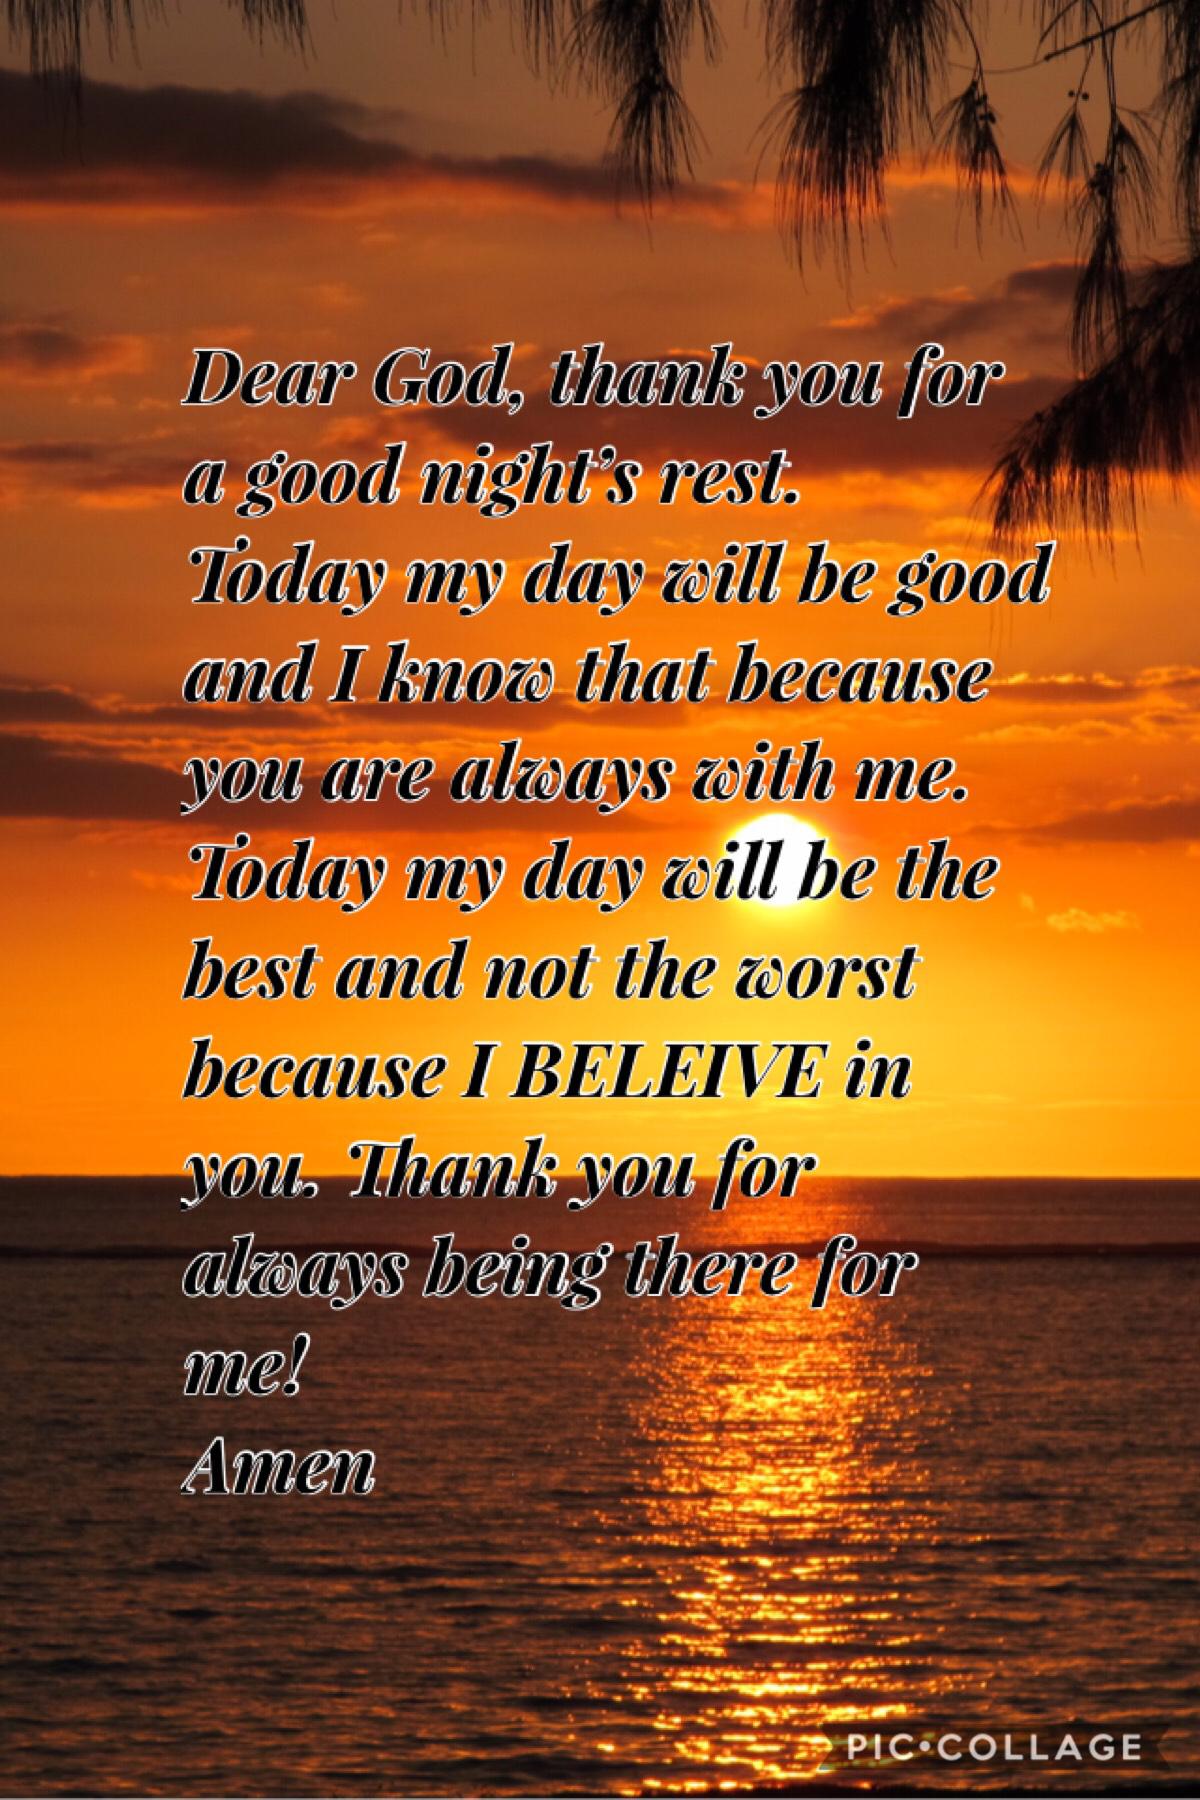 Here’s a morning prayer I promised you all!